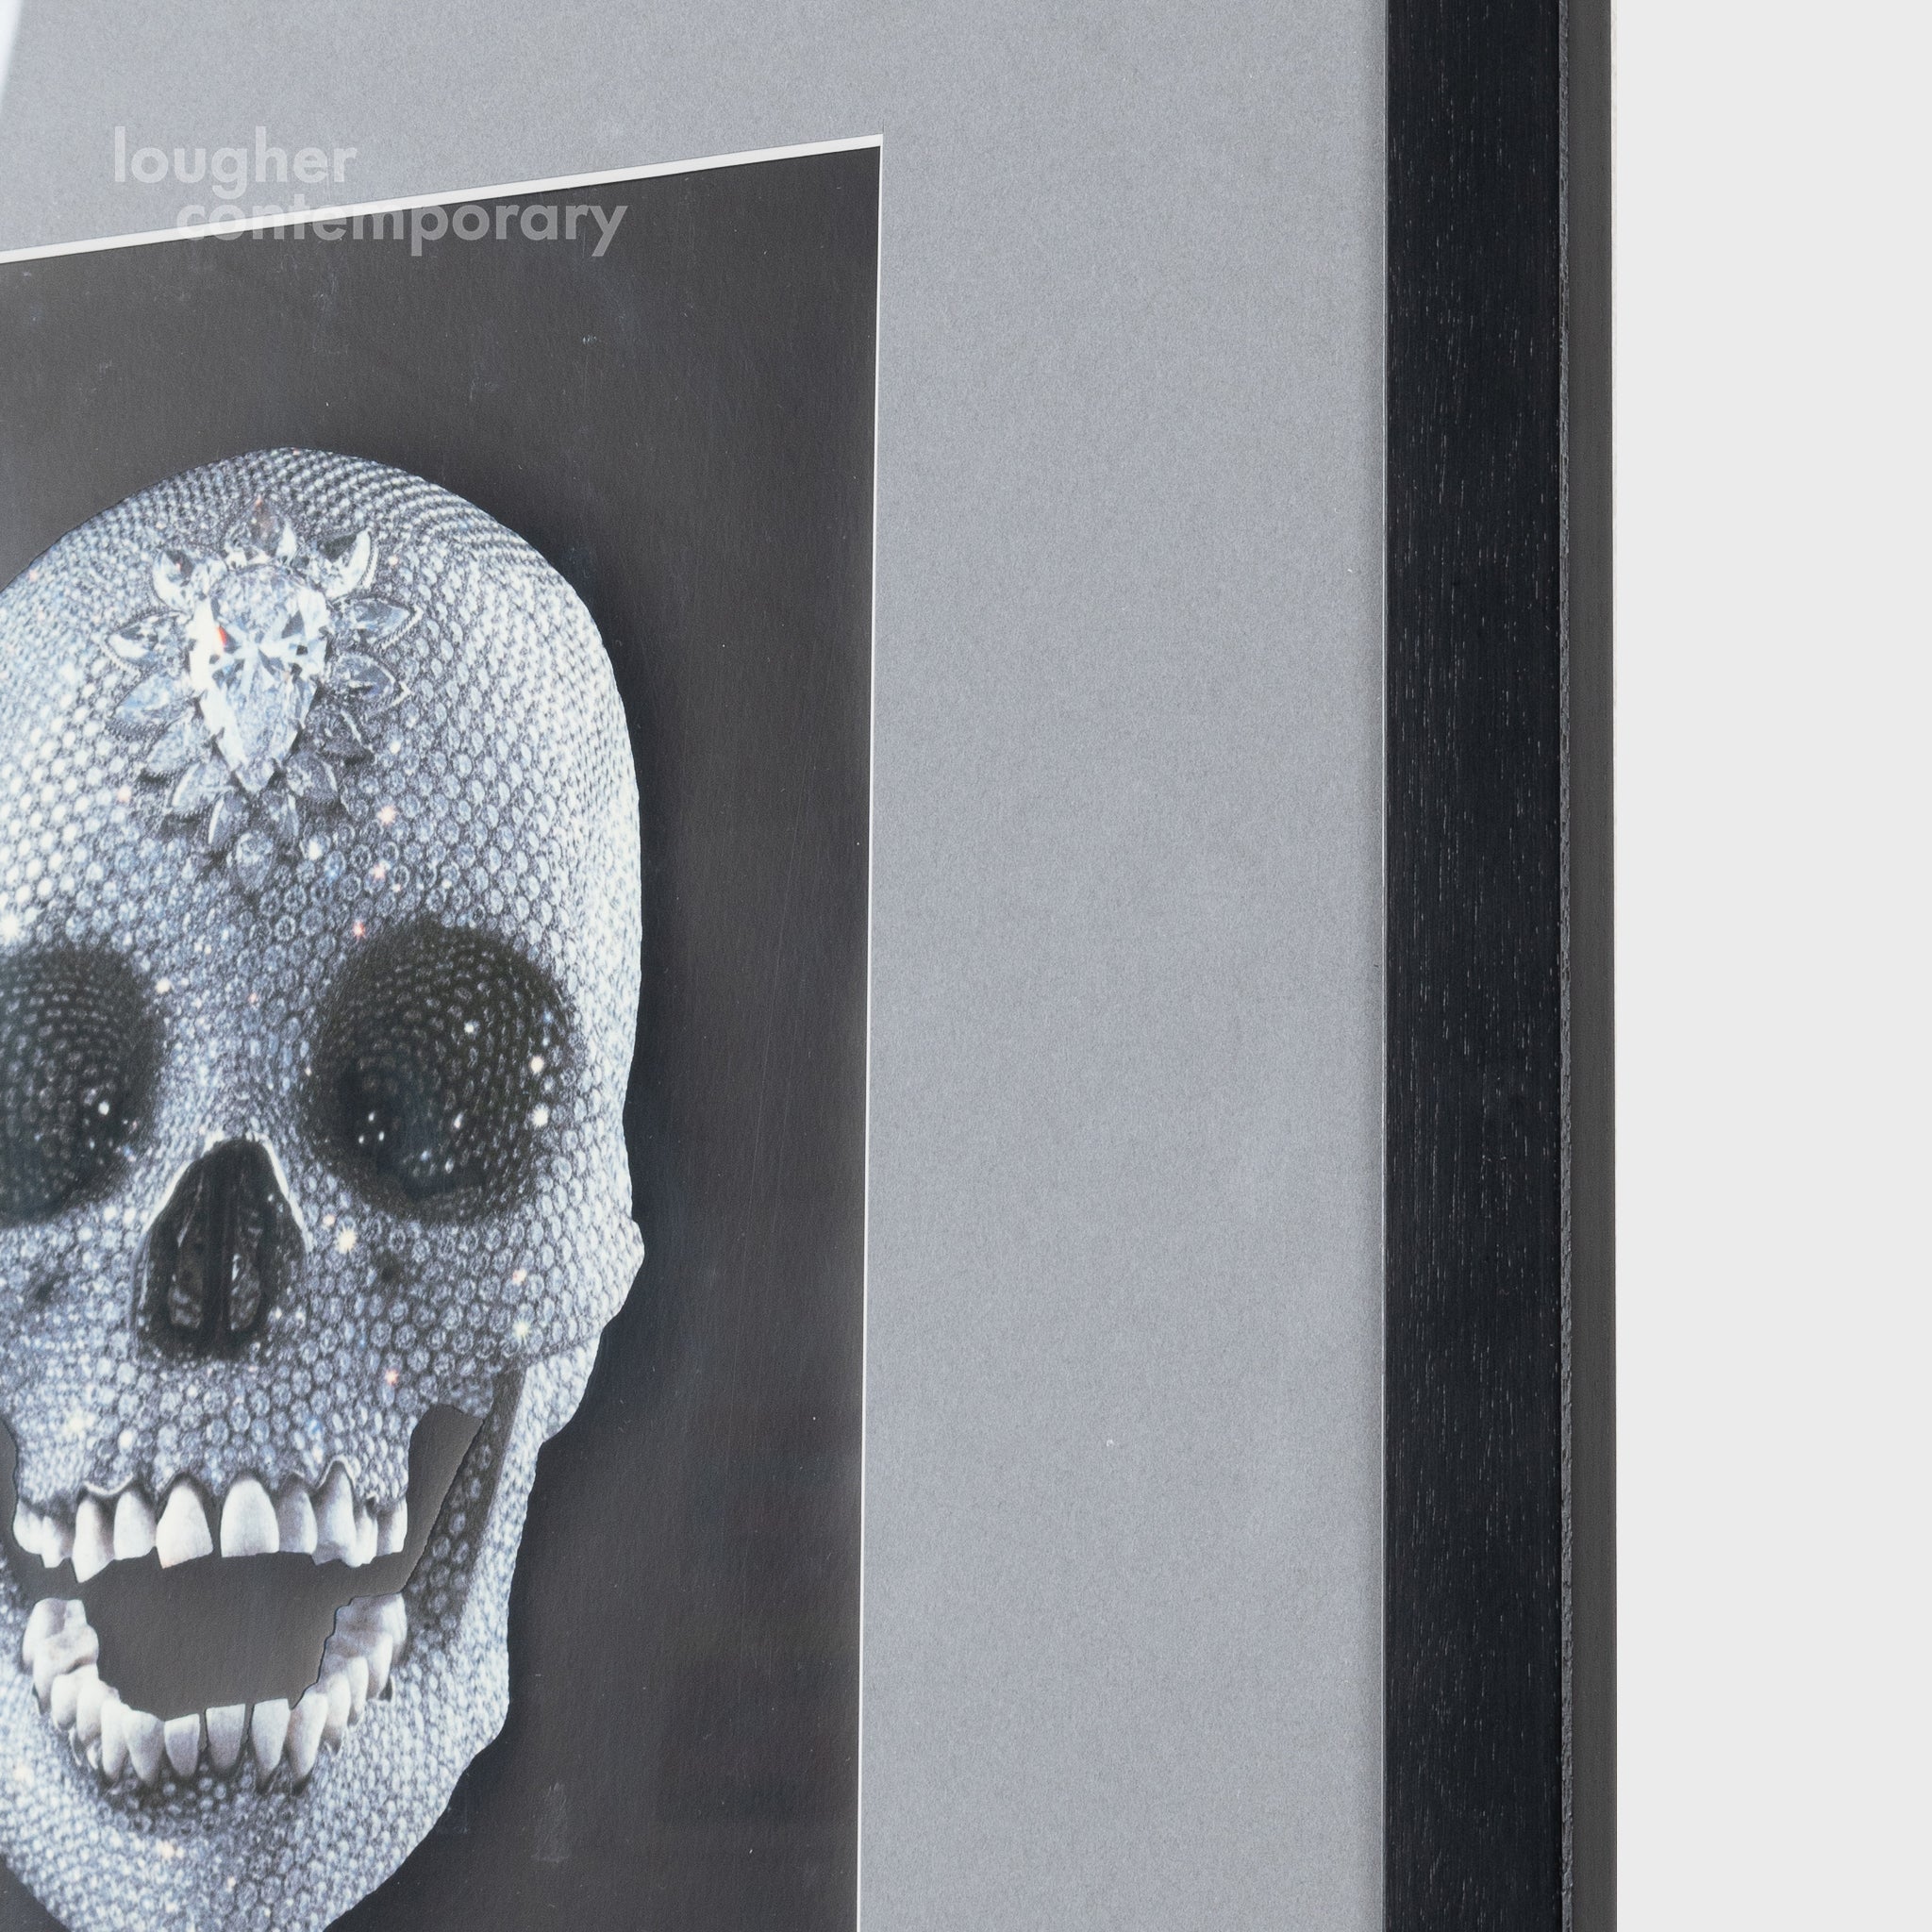 Damien Hirst, For the Love of God (Believe), 2007 For Sale | Lougher Contemporary 